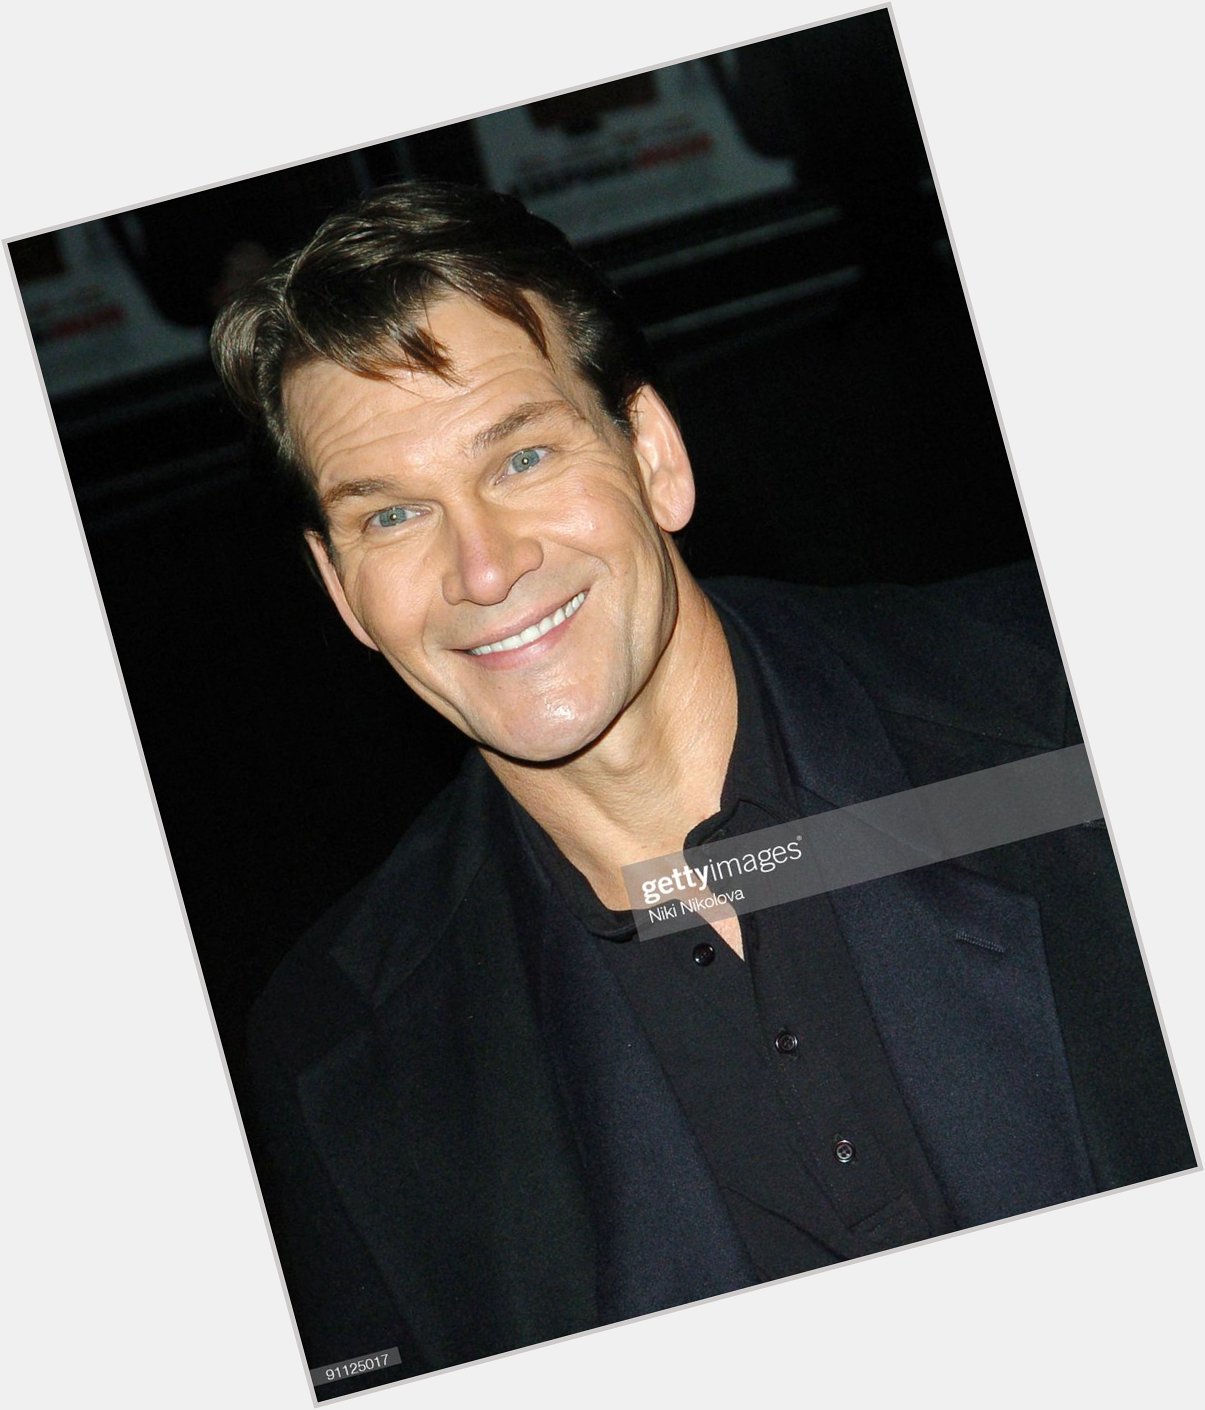 Happy heavenly birthday to Patrick Swayze who would have been 70 today 